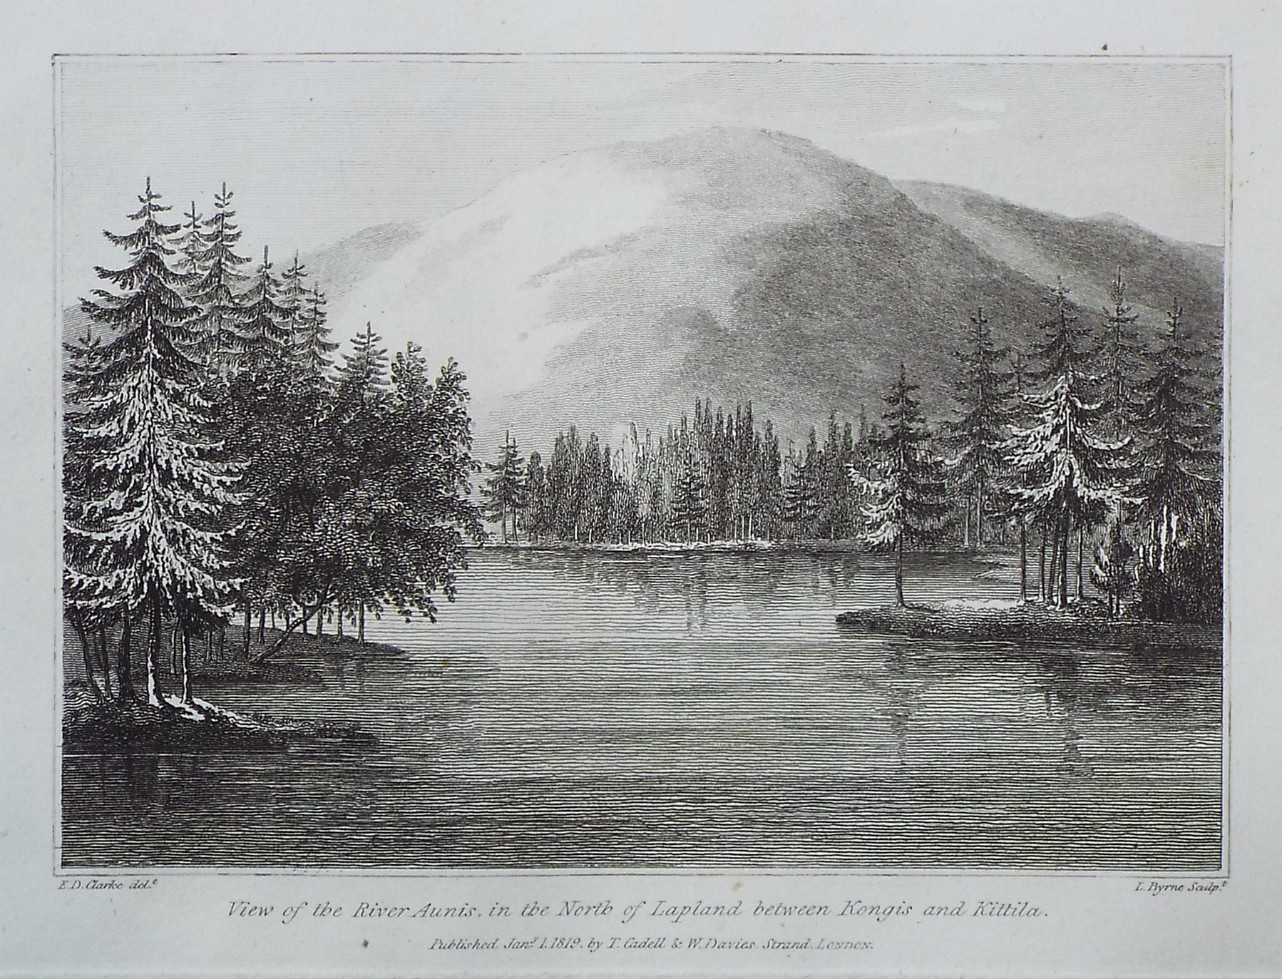 Print - View of the River Aunis, in the North of Lapland between Kongis and Kittila - Byrne